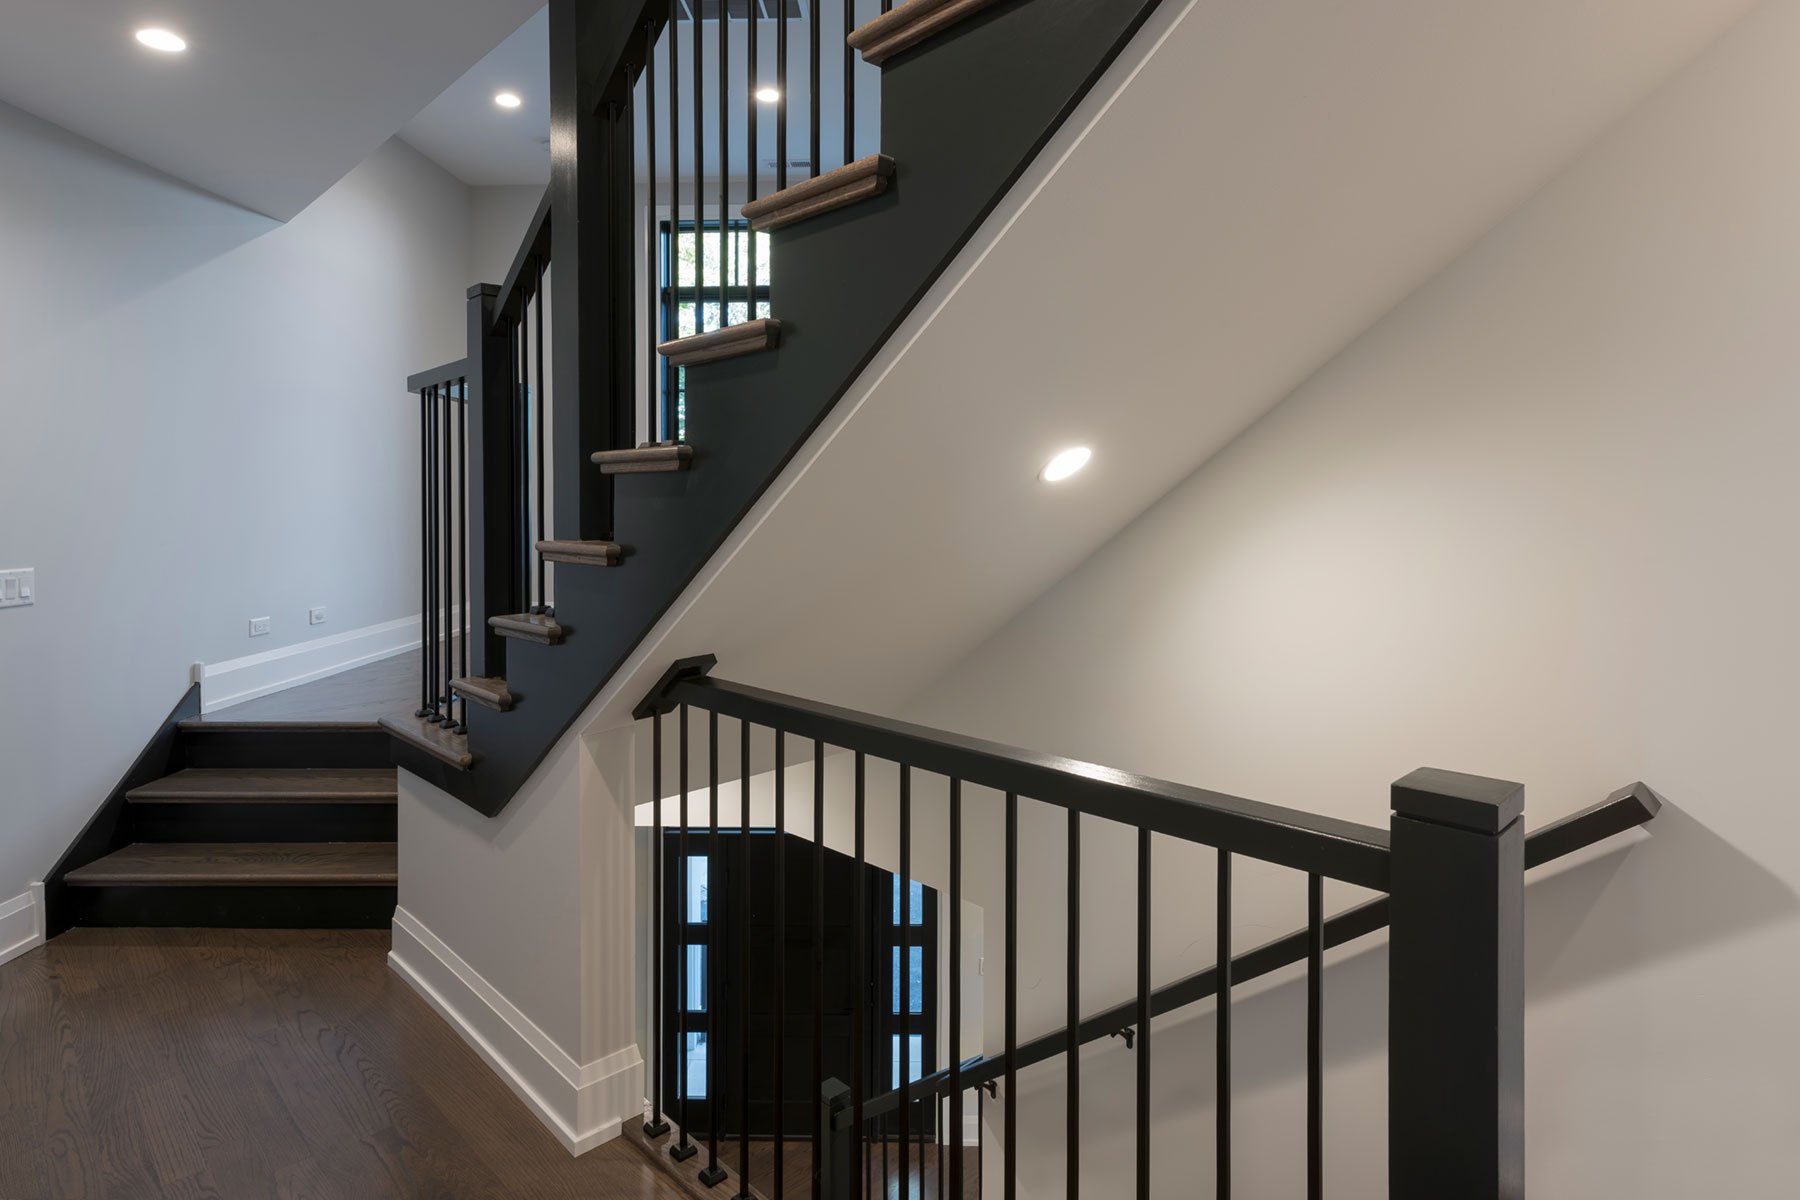 Staircase - N. Francisco Ave., Chicago, IL Custom Home. America's Custom Home Builders: New Construction, Remodeling, Restoration Services. Residential and Commercial.